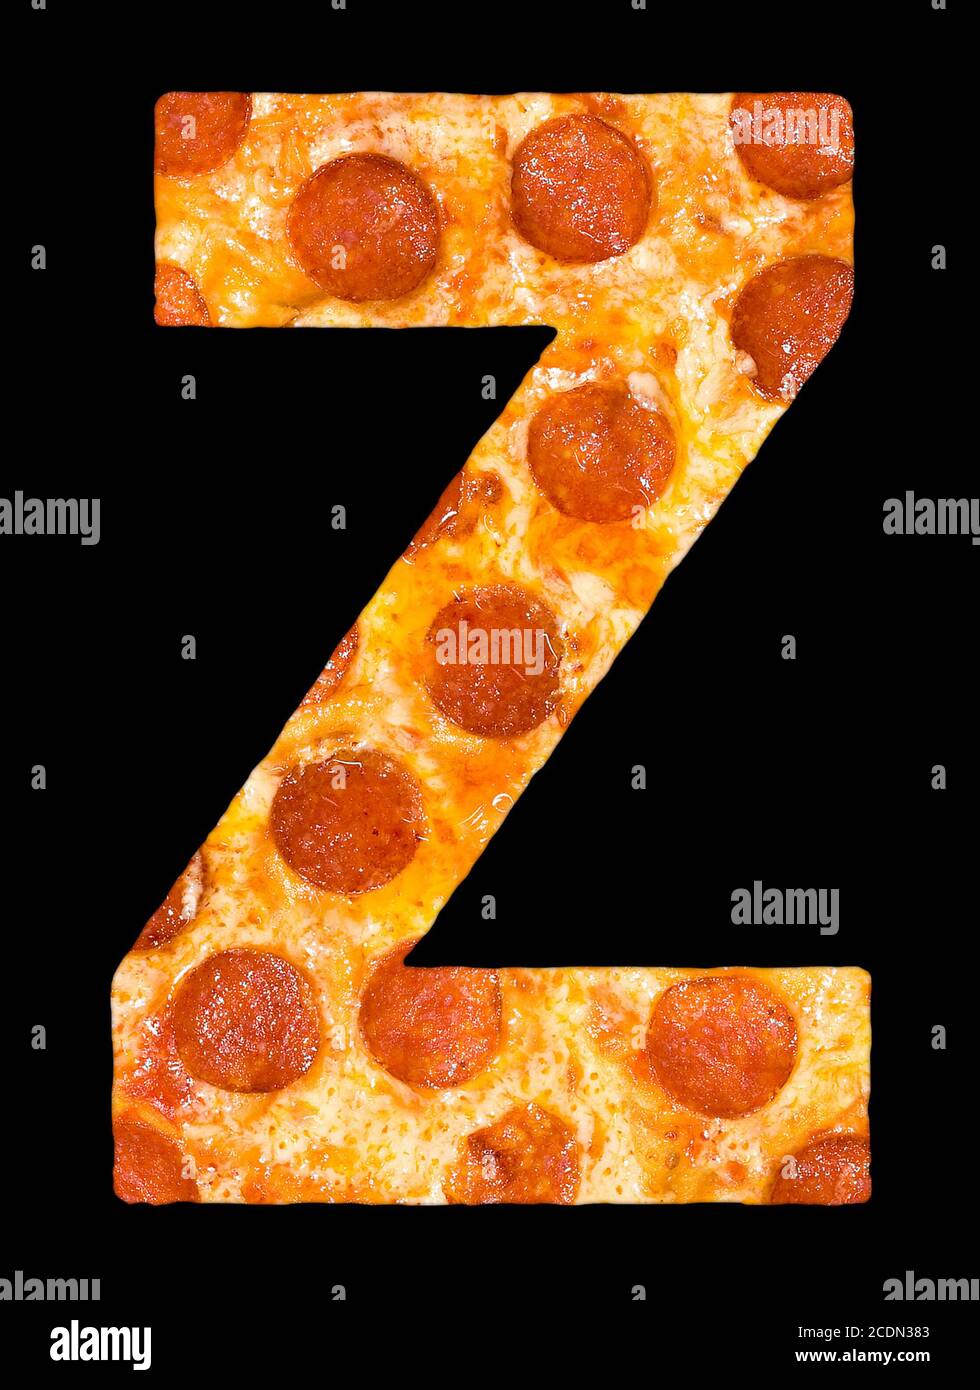 letter Z cut out of pizza with peperoni Stock Photo